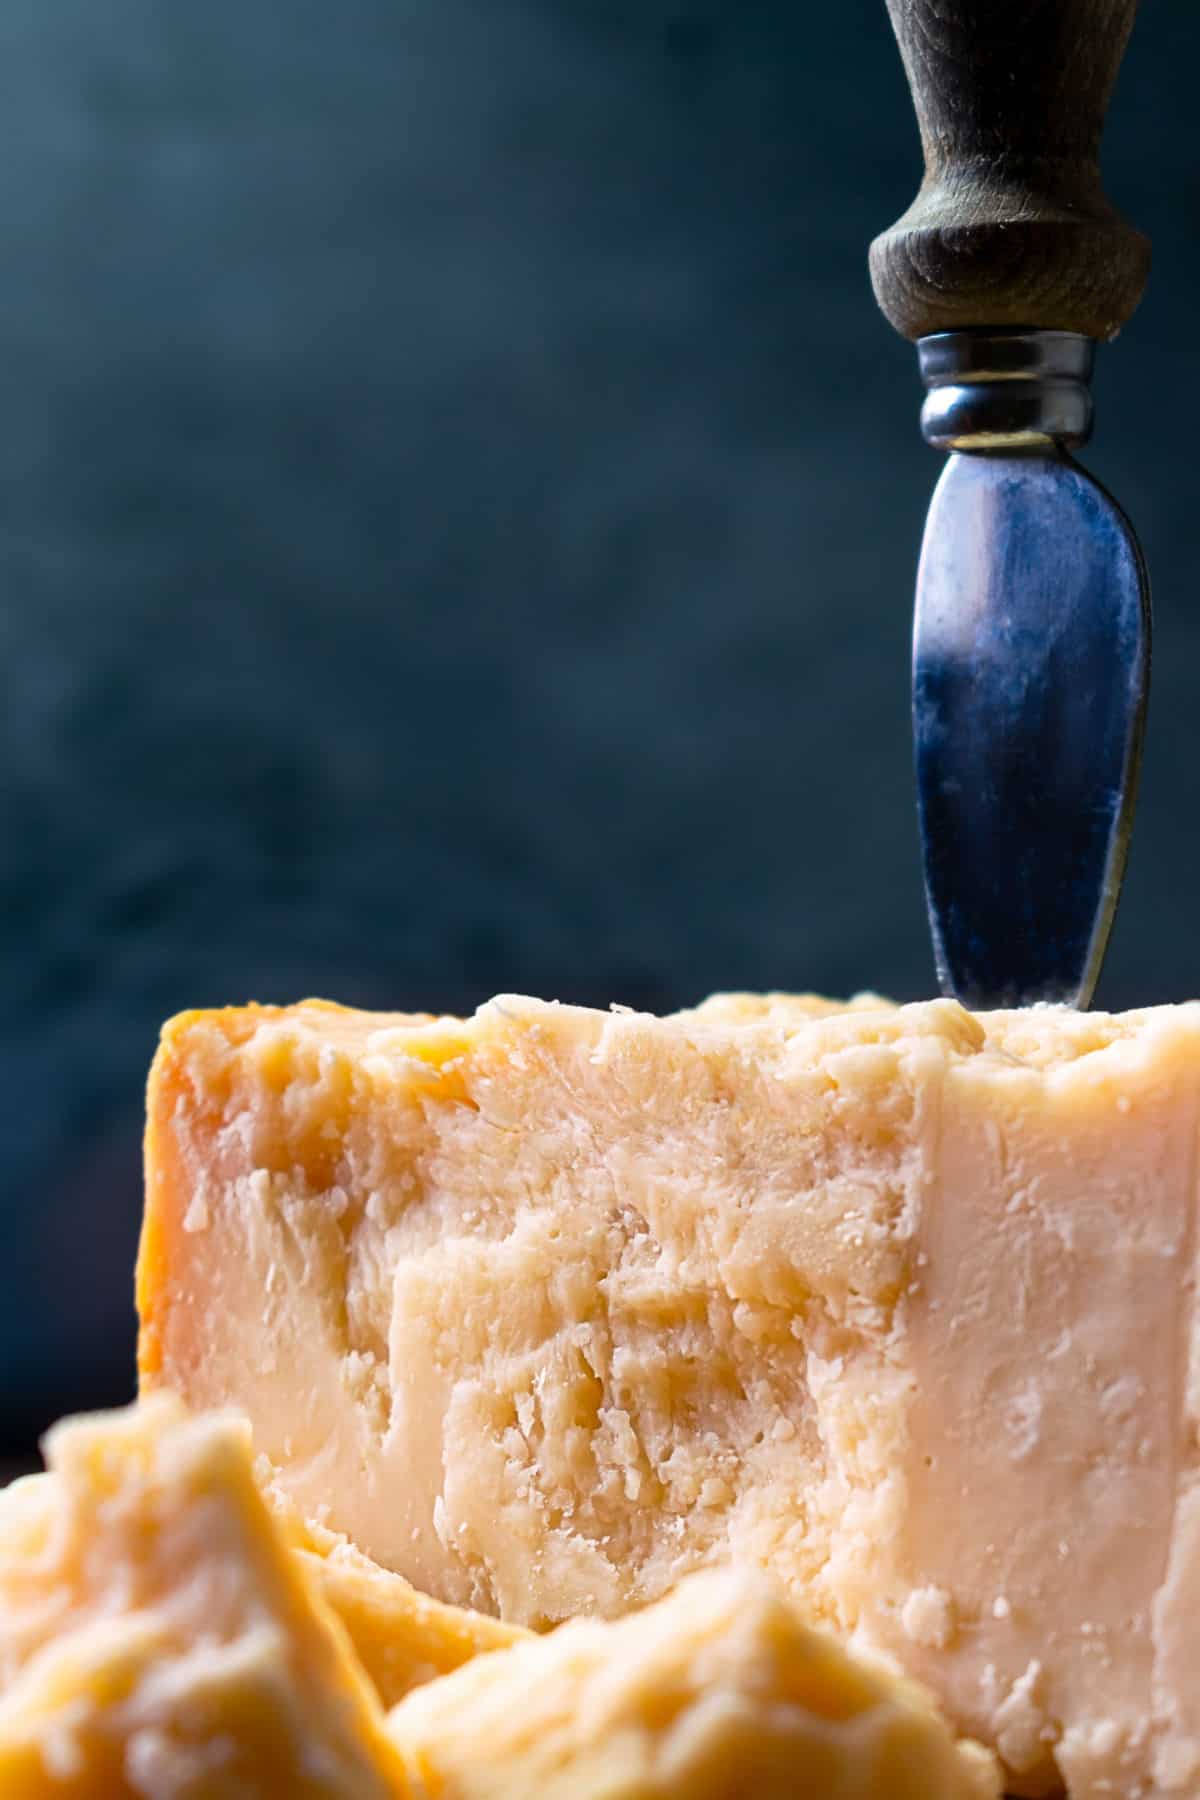 Parmesan cheese with knife.